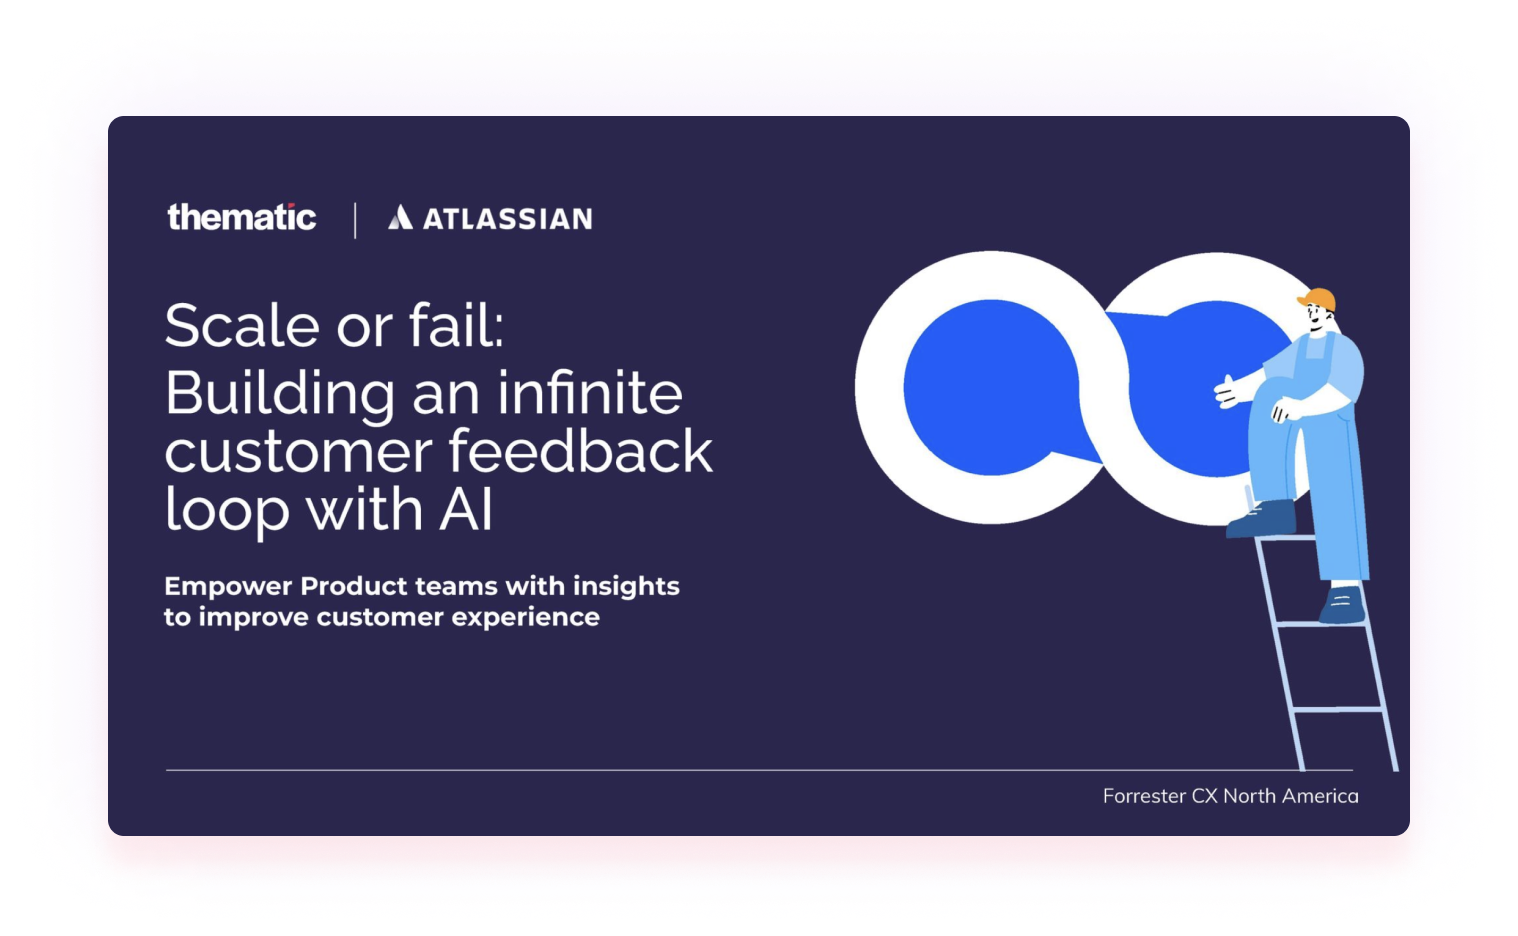 PDF cover of atlassian case study called 'scale or fail: building an infinite customer feedback loop with AI'